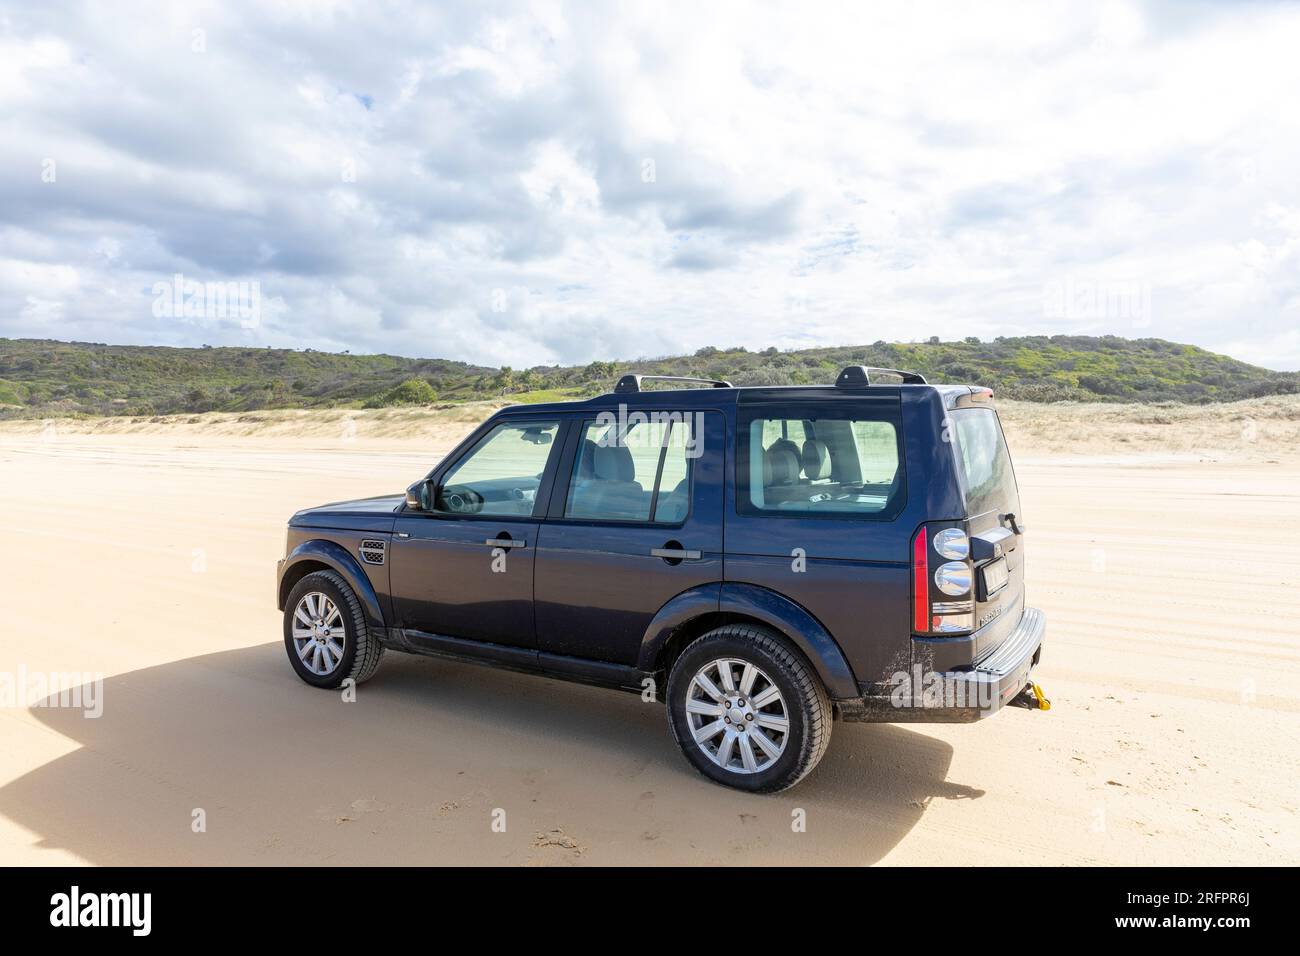 75 mile beach on Fraser Island K'gari, Land Rover Discovery 4 property released drives on the sand highway road,Queensland,Australia Stock Photo